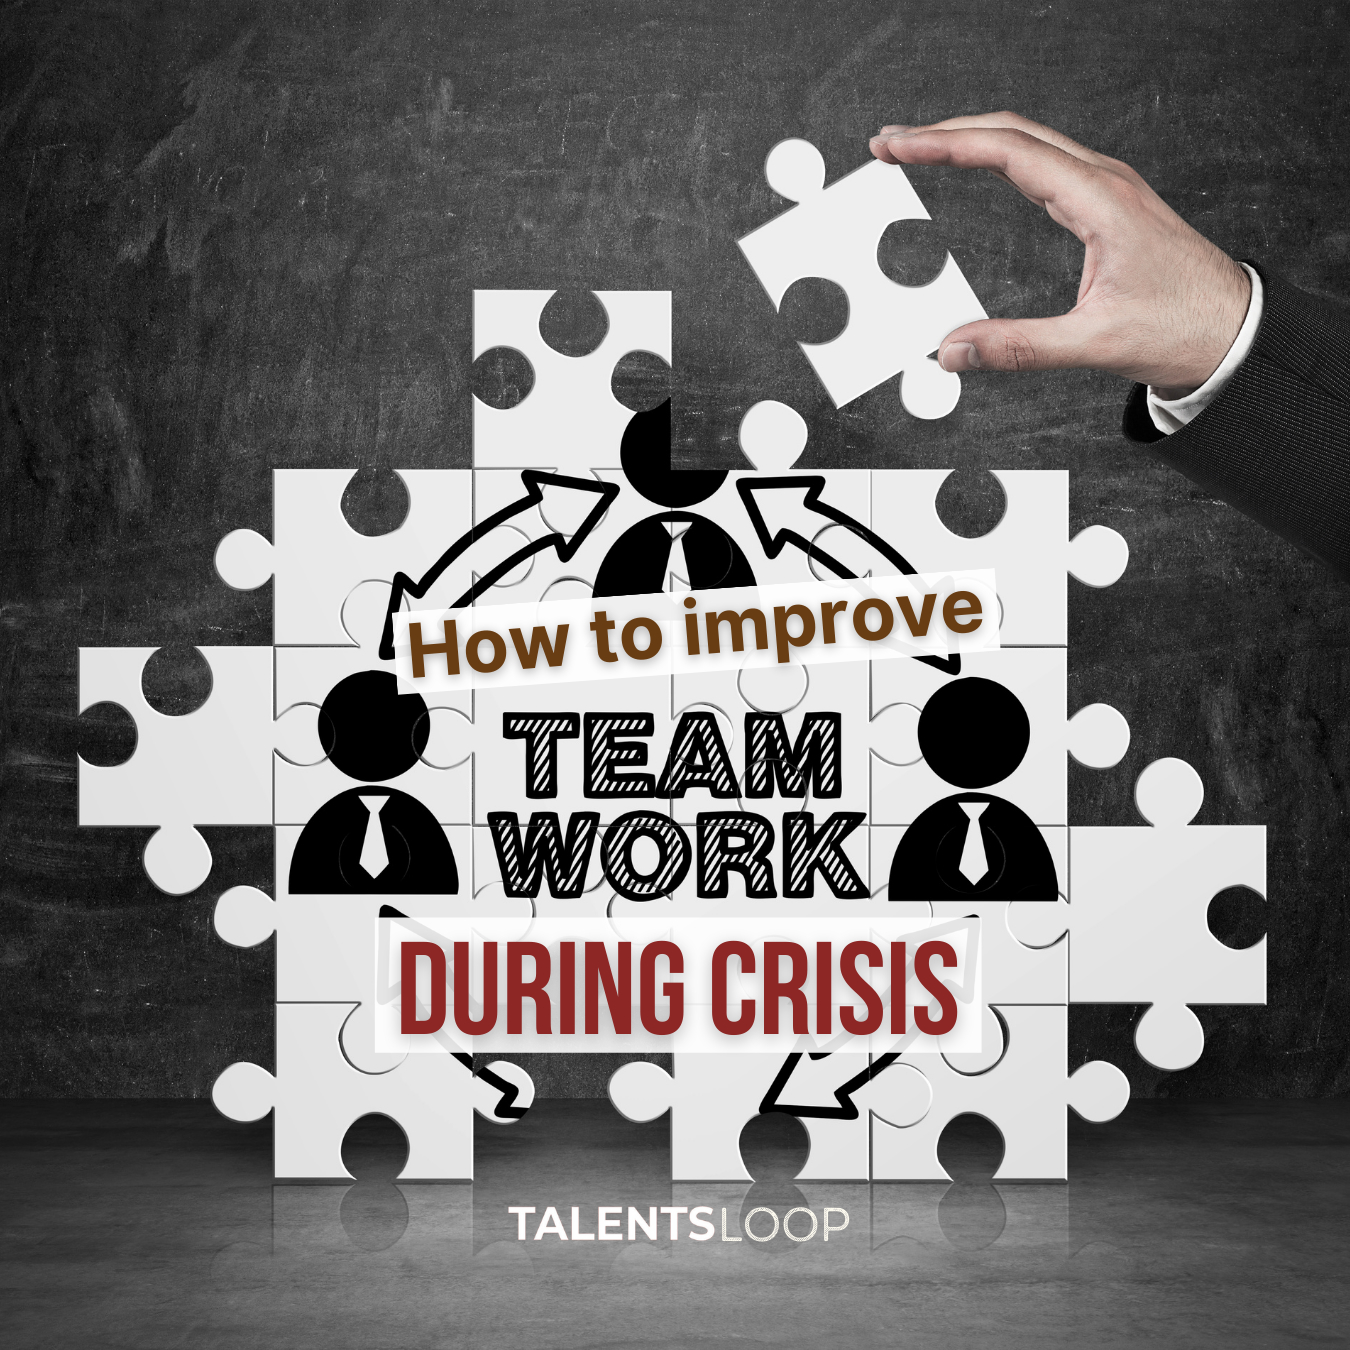 How to improve teamwork during crisis?